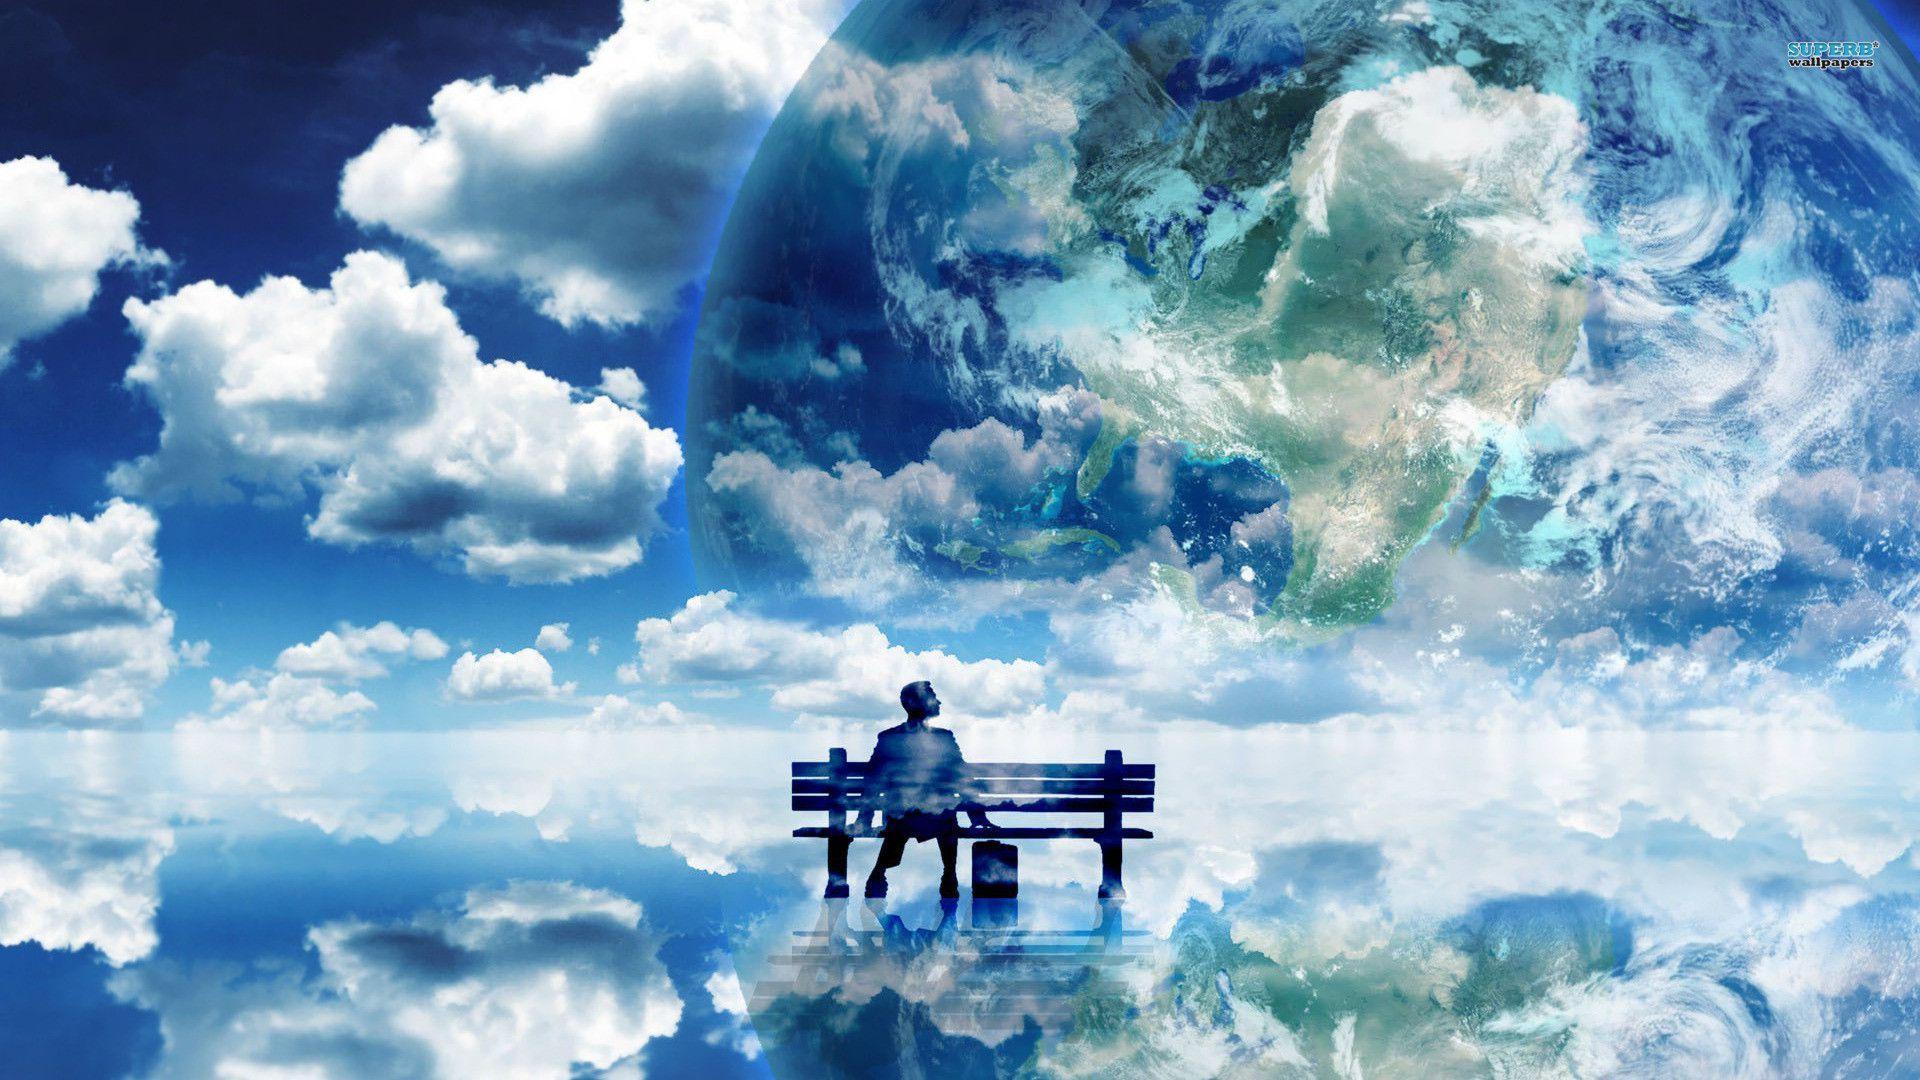 Bench in the clouds wallpaper wallpaper - #